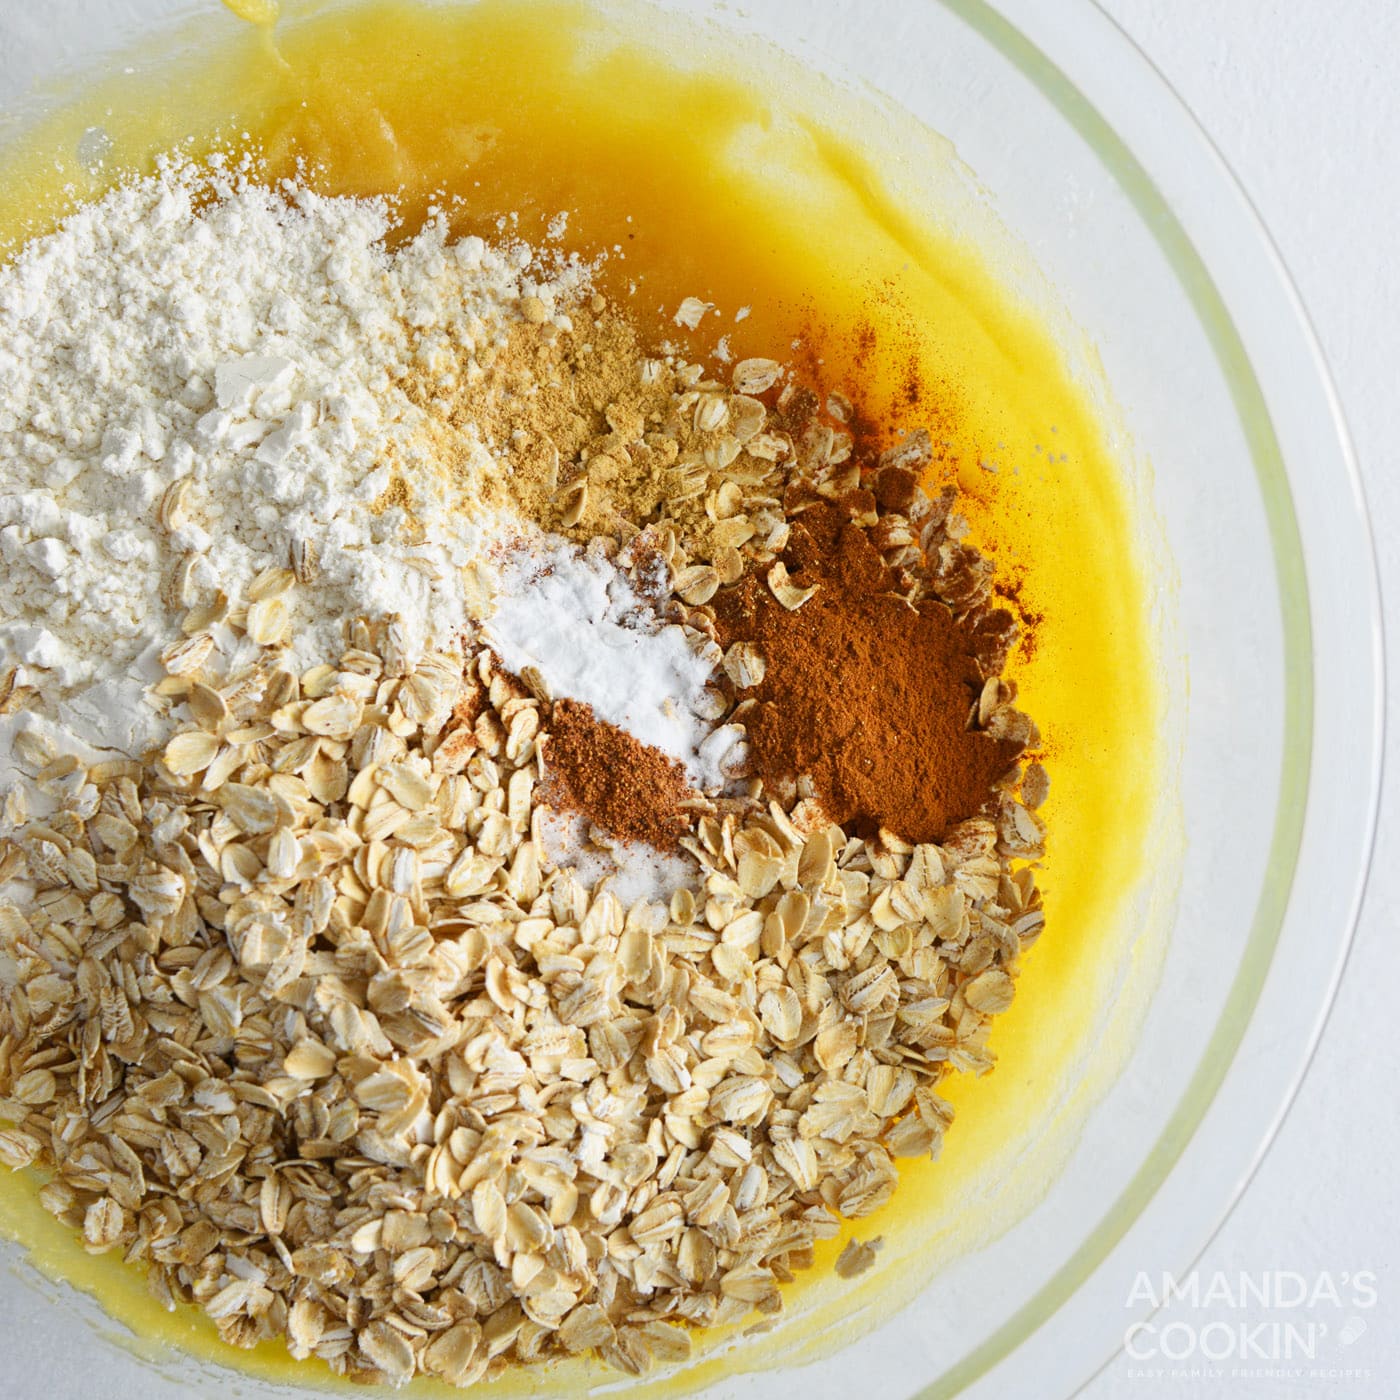 oats, flour, and spices added to mixing bowl